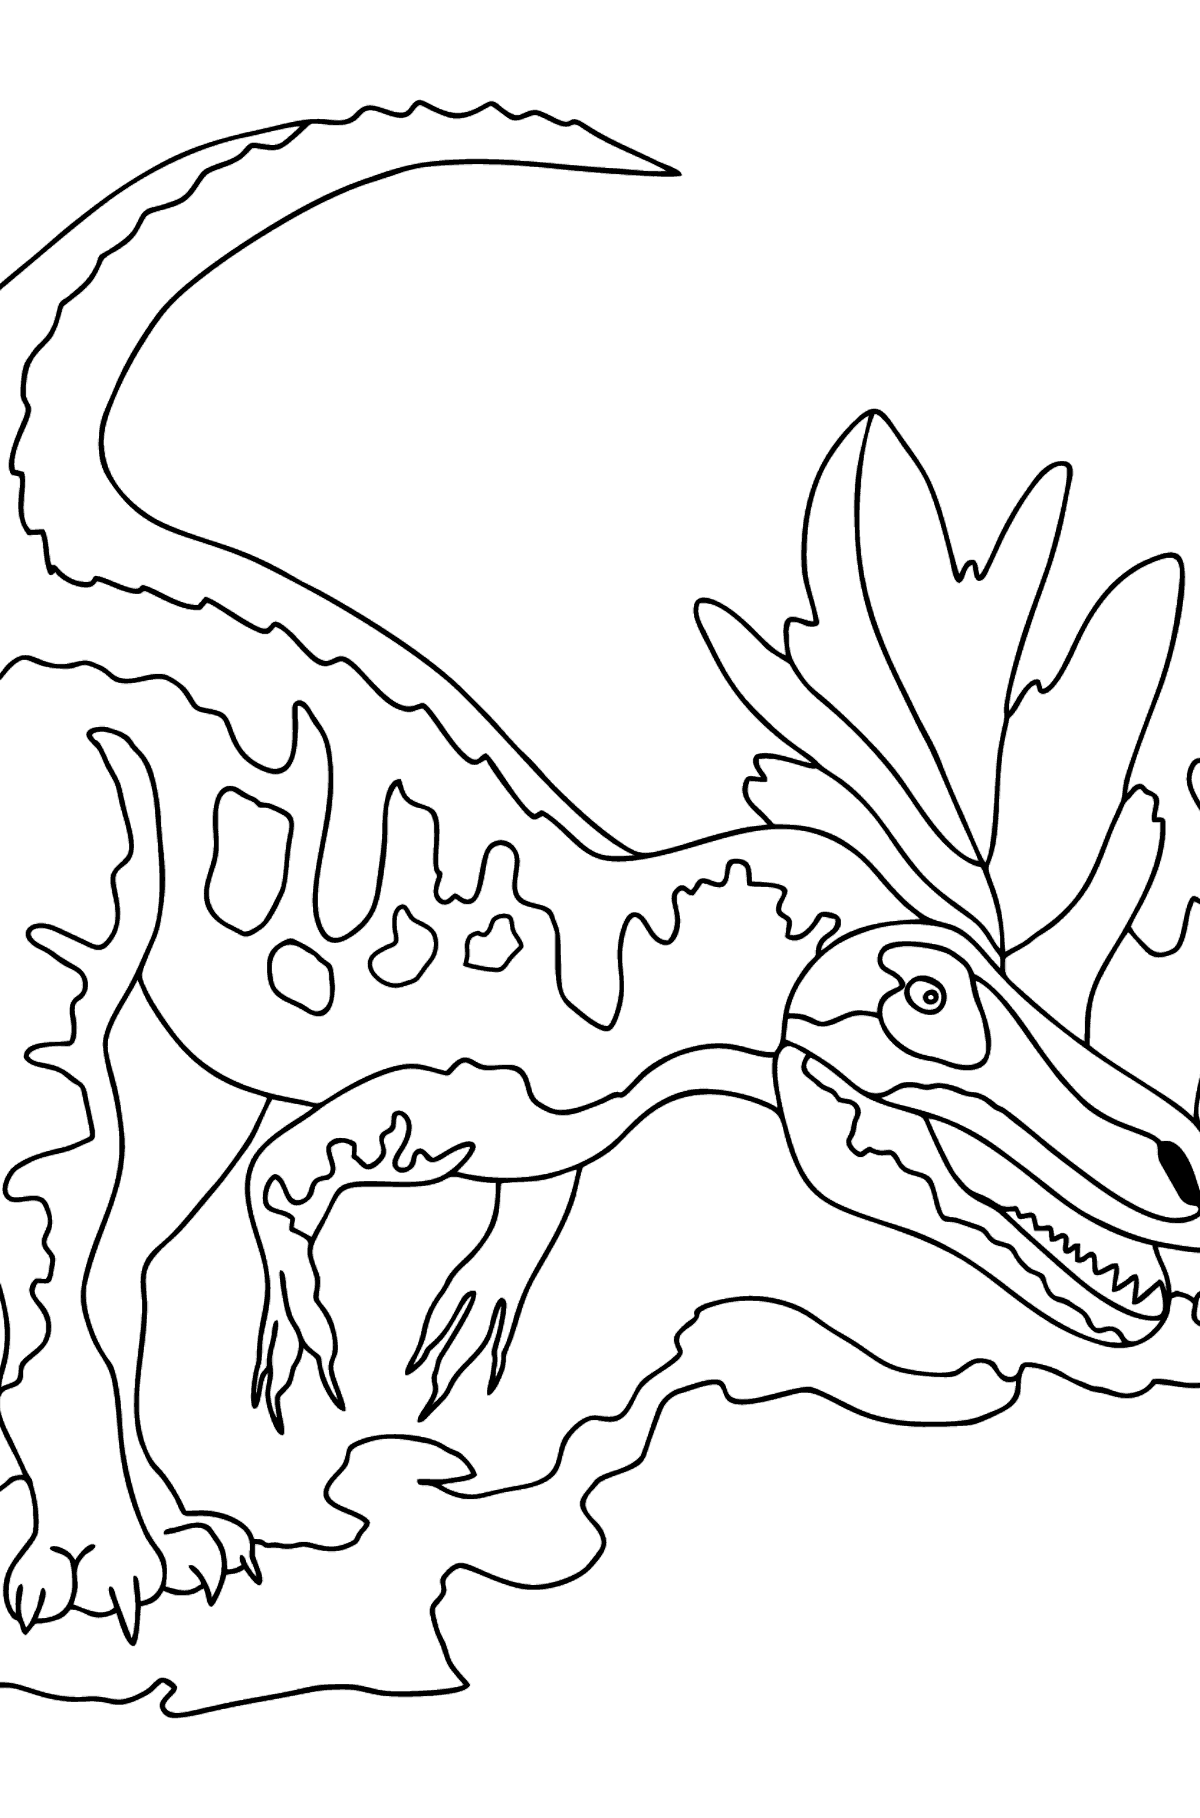 Coloring Page - Allosaurus - A Well-Researched Dinosaur - Coloring Pages for Kids